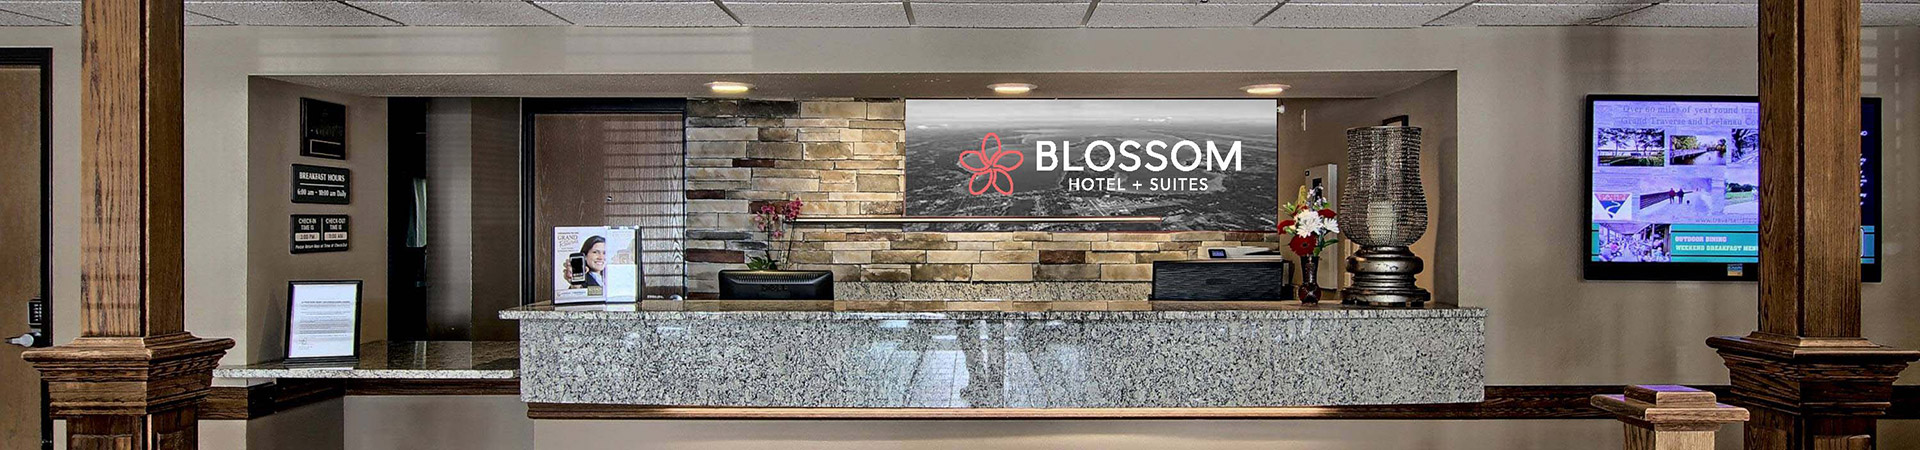 The welcome counter to contact Blossom Hotel & Suites